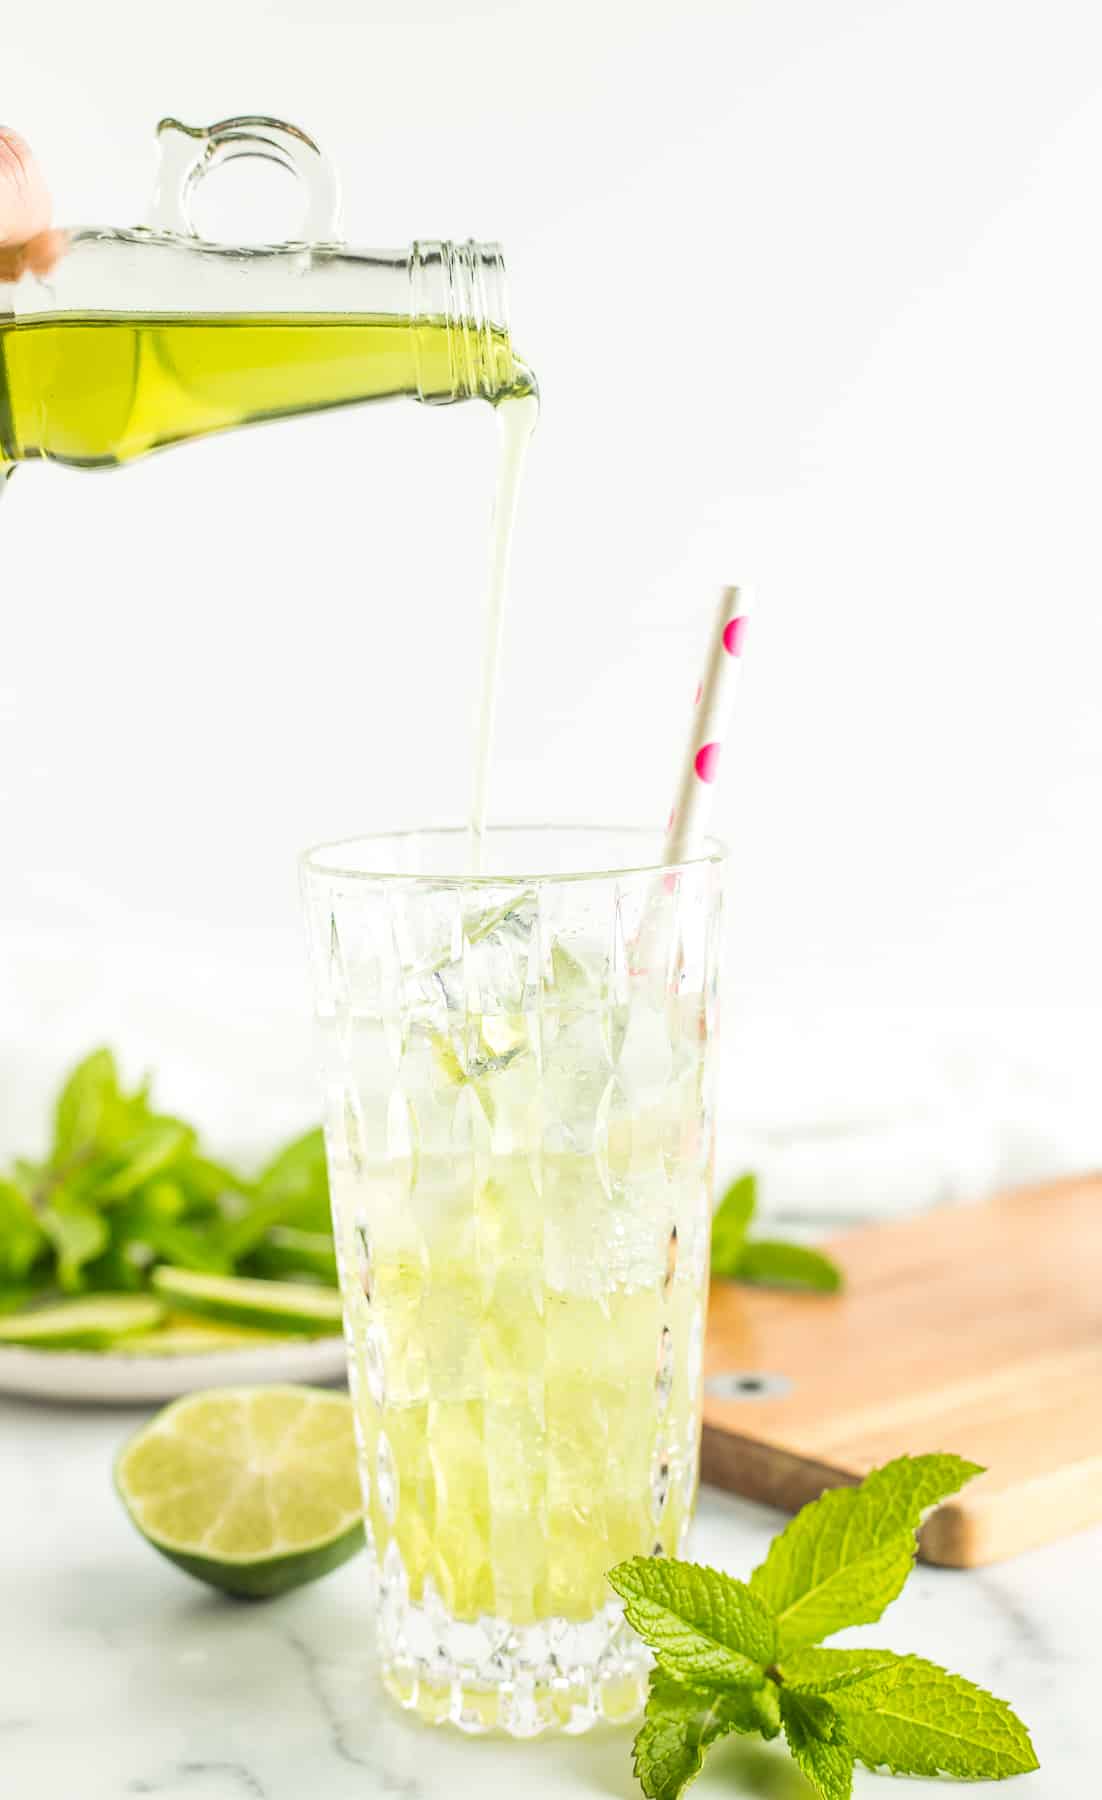 a bottle pouring green liquid into a glass filled with sparkling water, and ice cubes.